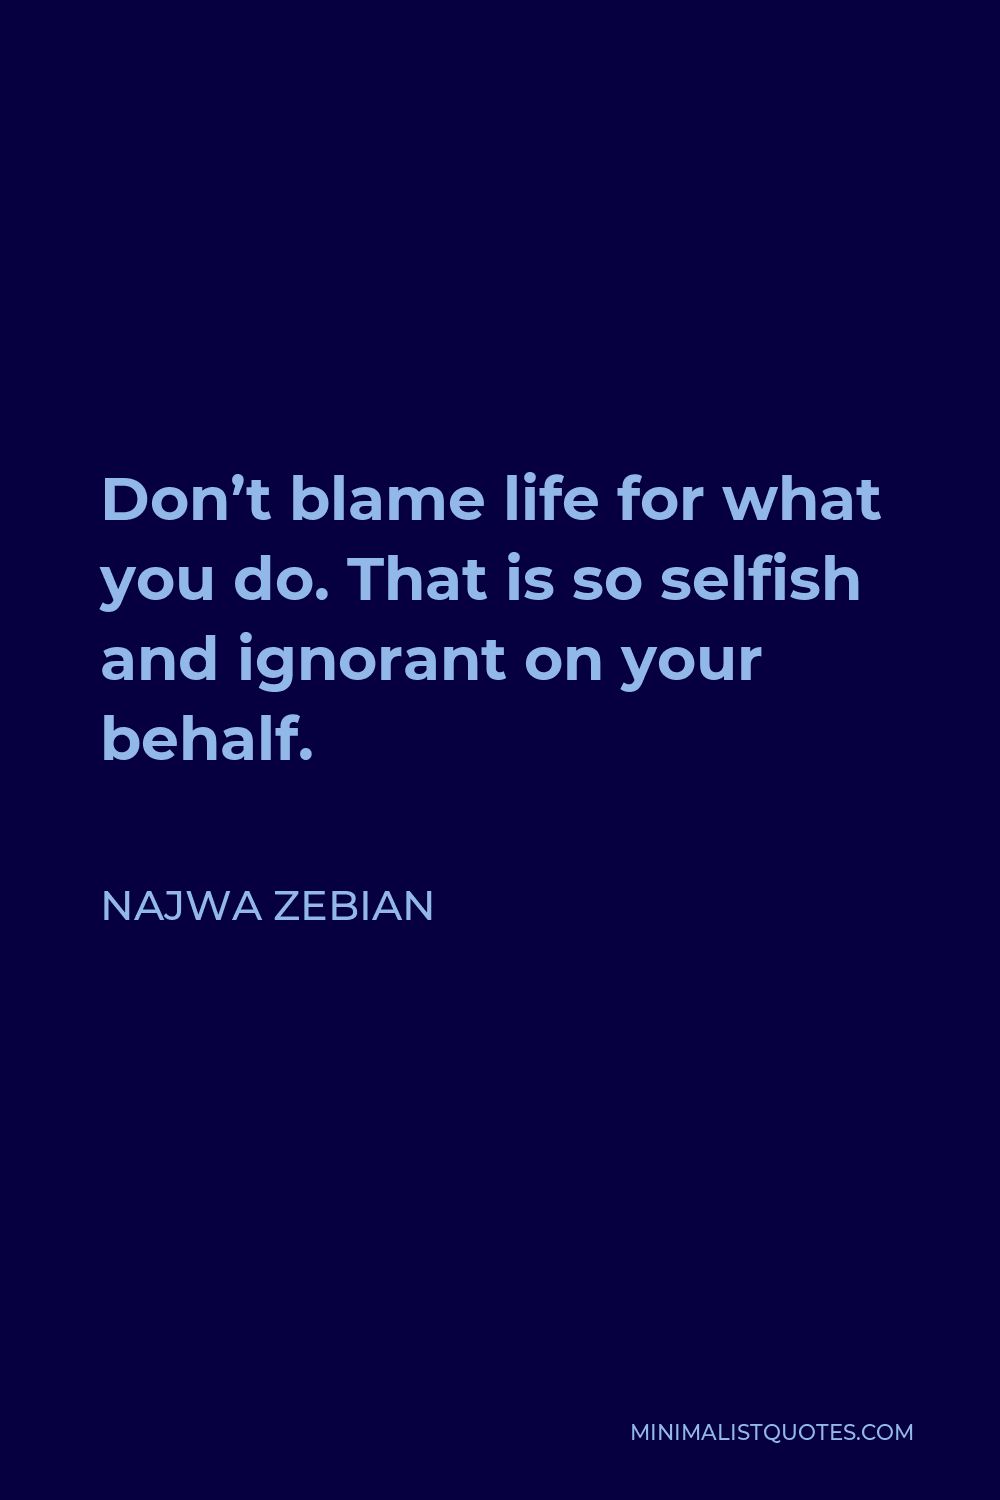 Najwa Zebian Quote - Don’t blame life for what you do. That is so selfish and ignorant on your behalf.